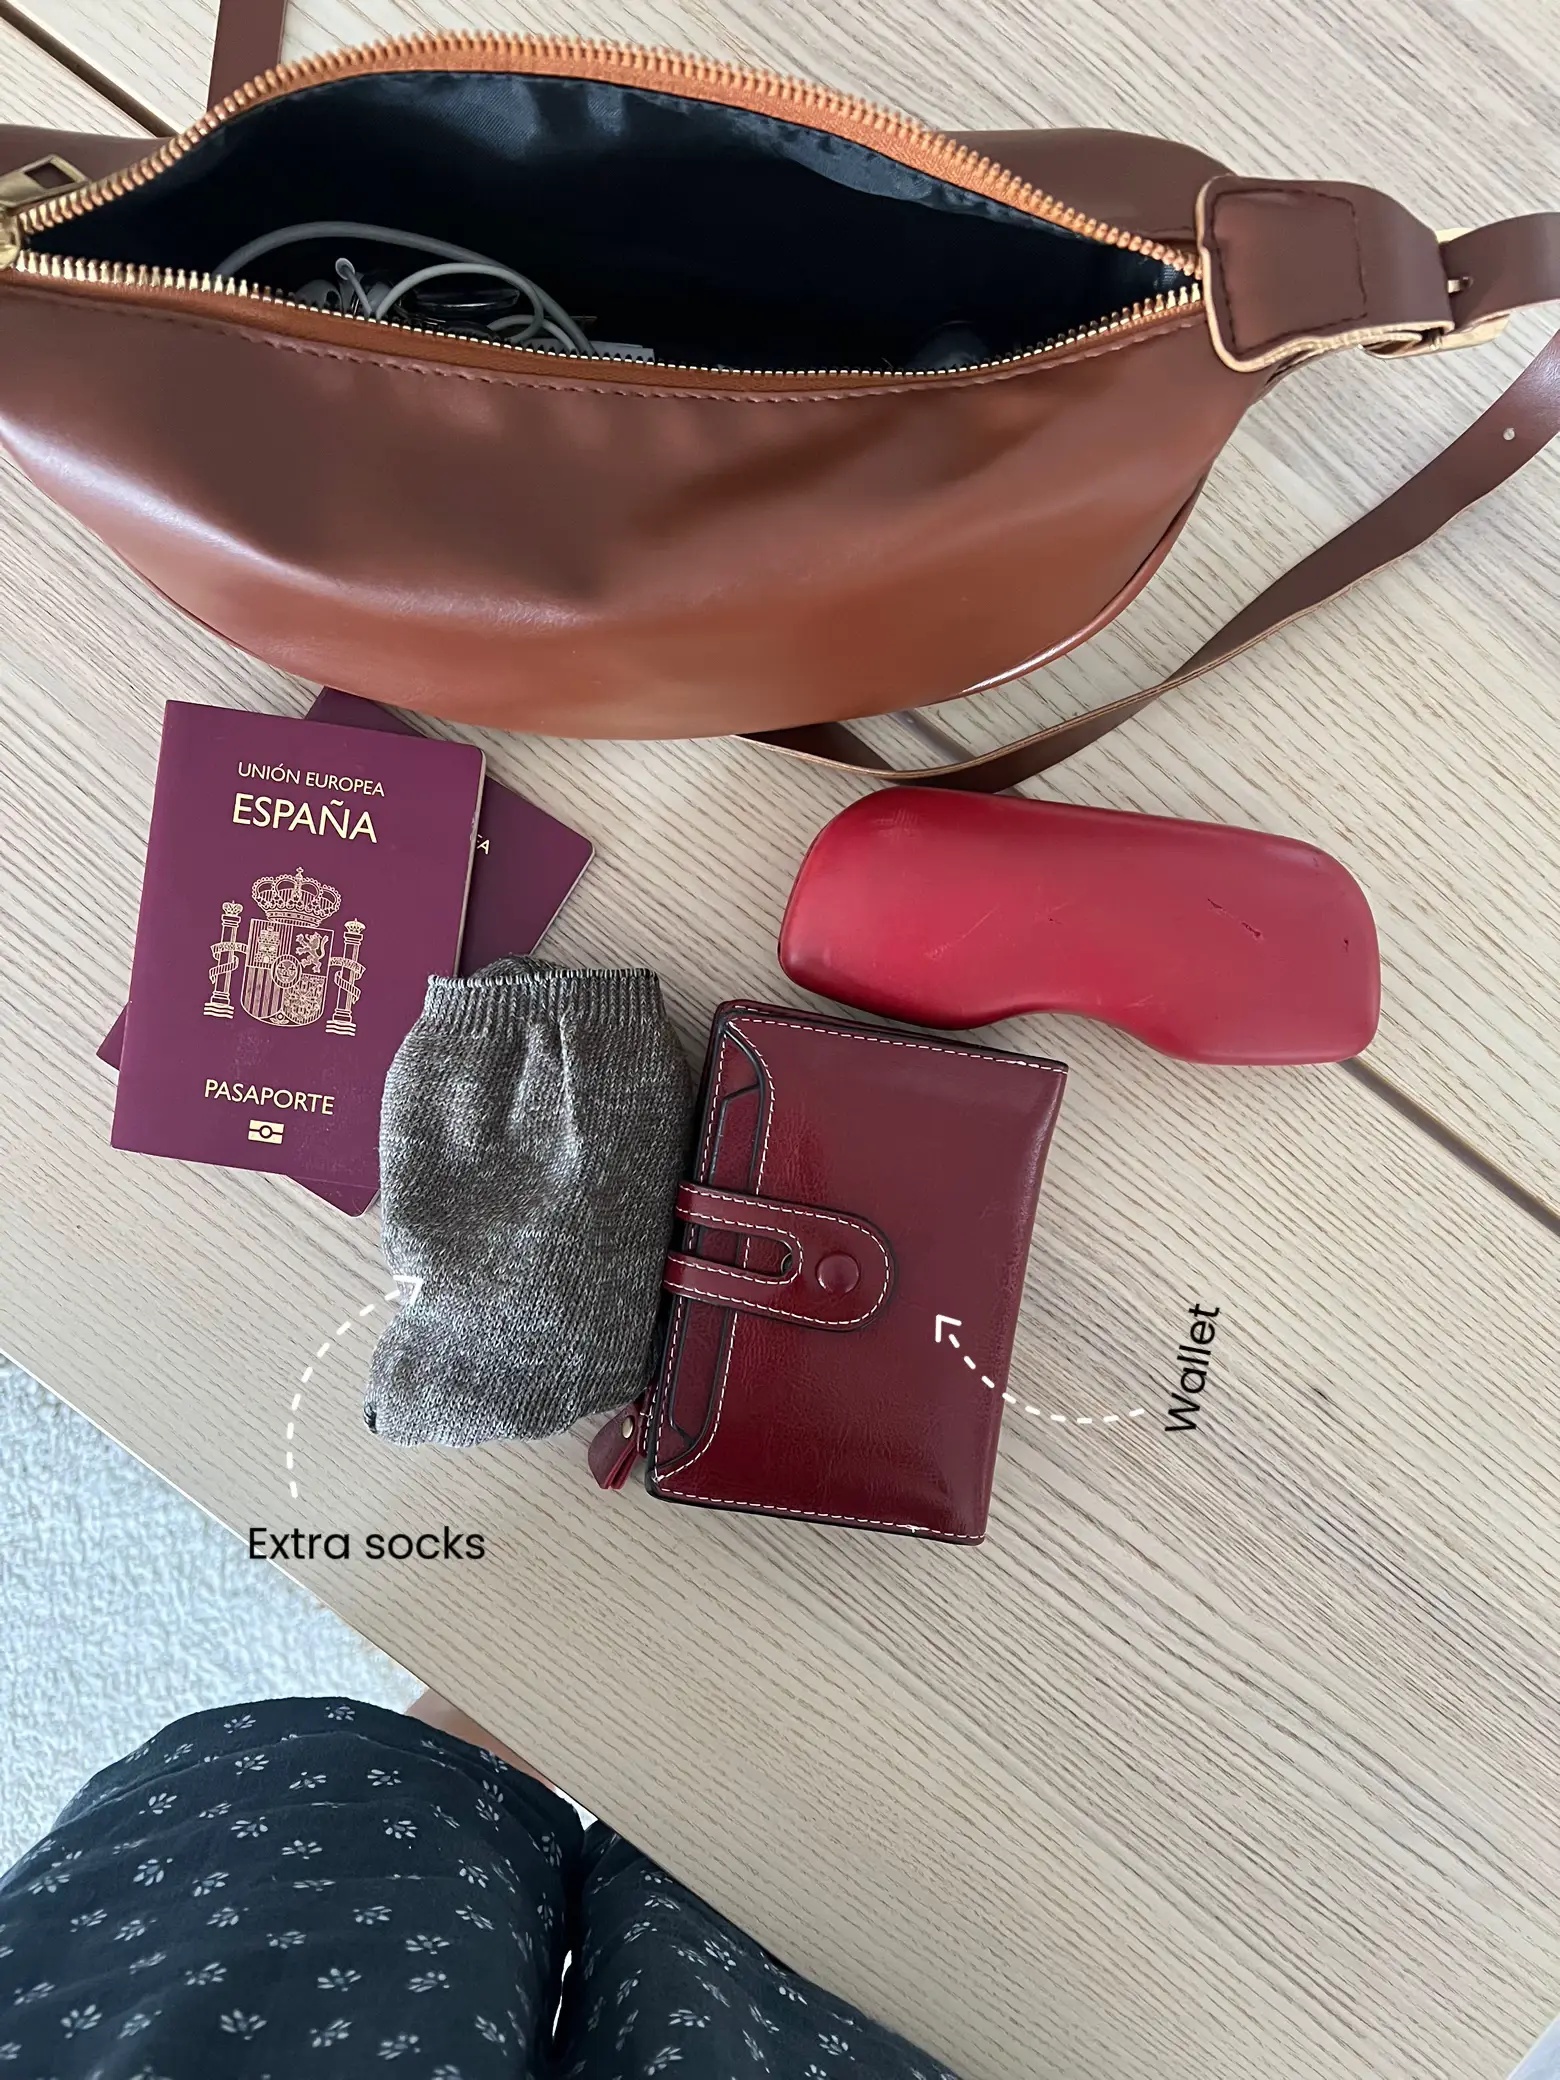 What’s in my travel bag?'s images(3)